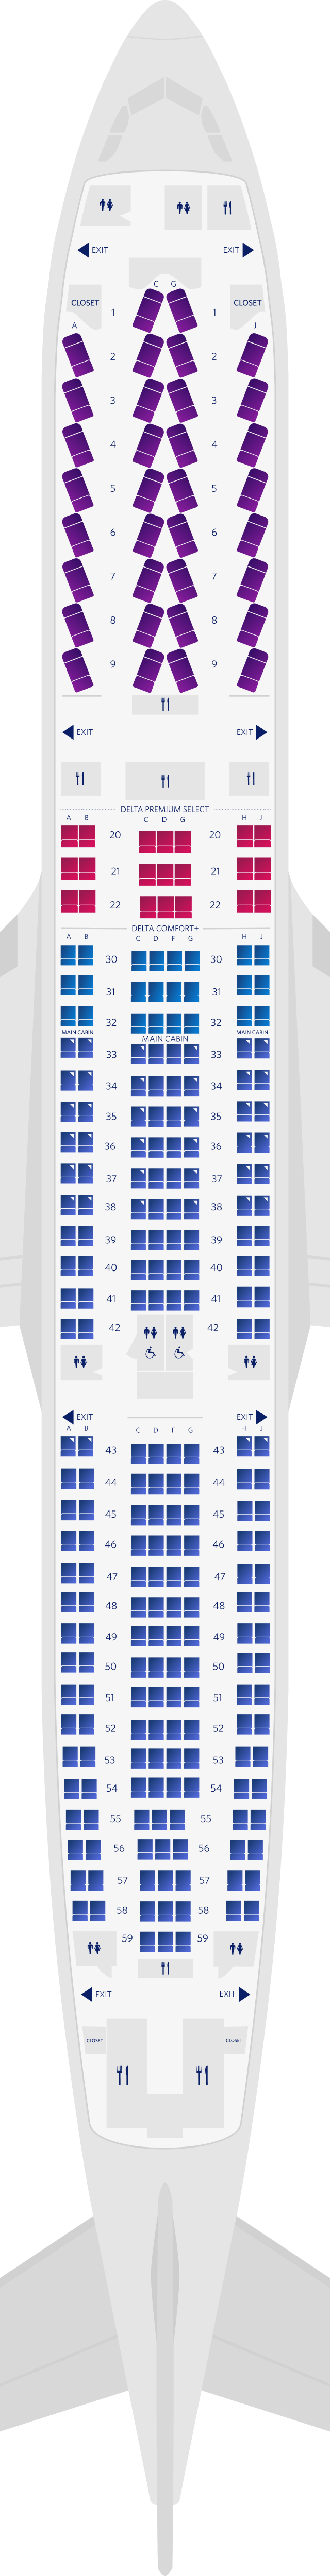 Airbus A330-300 Seat Maps, Specs & Amenities | Delta Air Lines